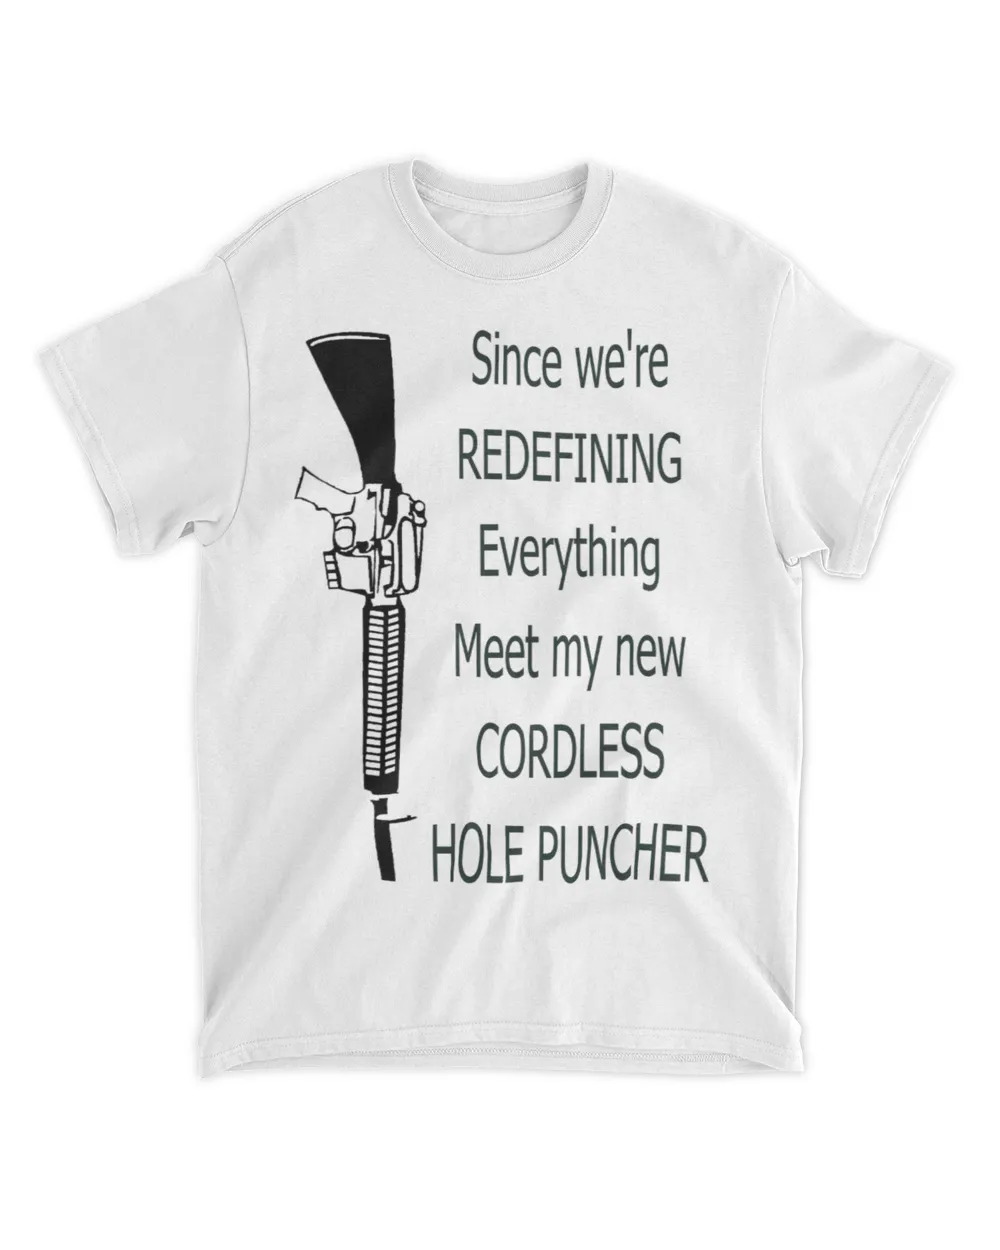  Since we're redefining everything meet my new cordless hole puncher shirt